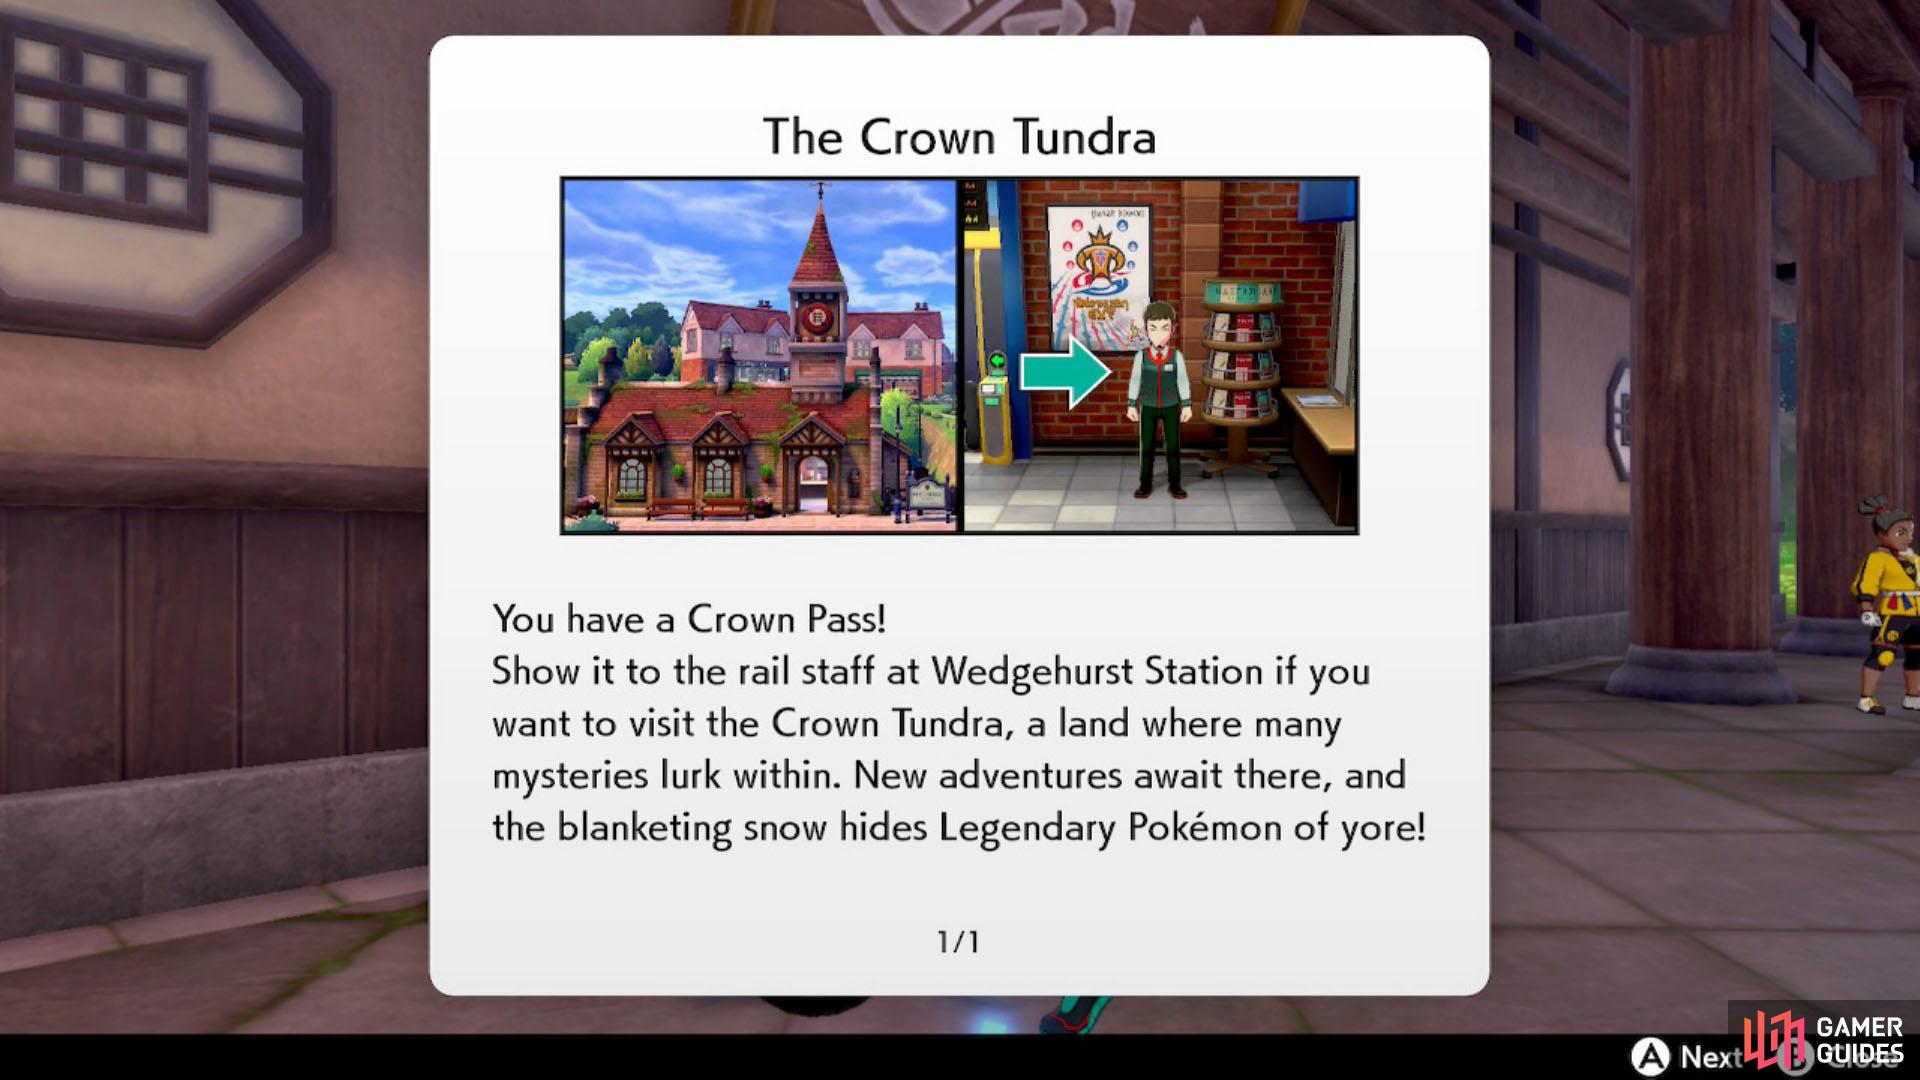 Pokemon Sword/Shield - list of new version-exclusive Pokemon from The Crown  Tundra